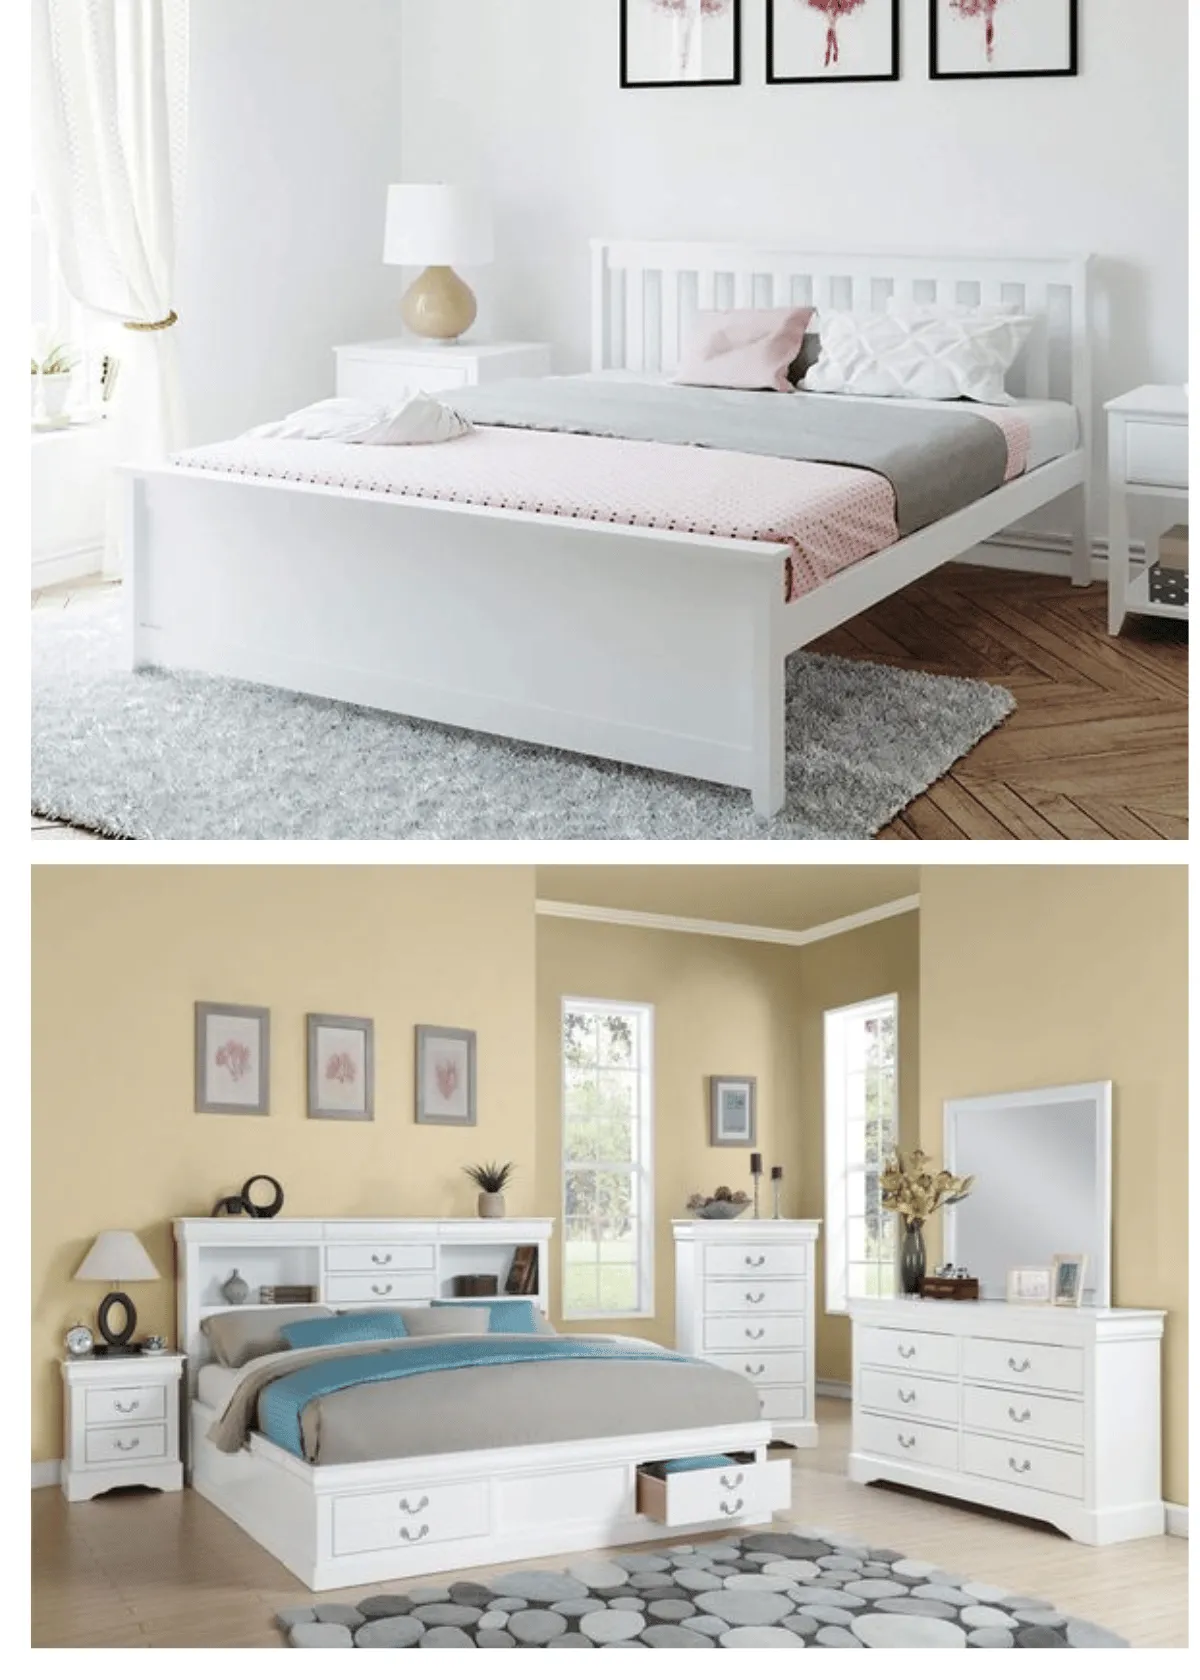 Find the perfect queen bed frame for a stylish bedroom. (Credit: Max & Lily; ACME)